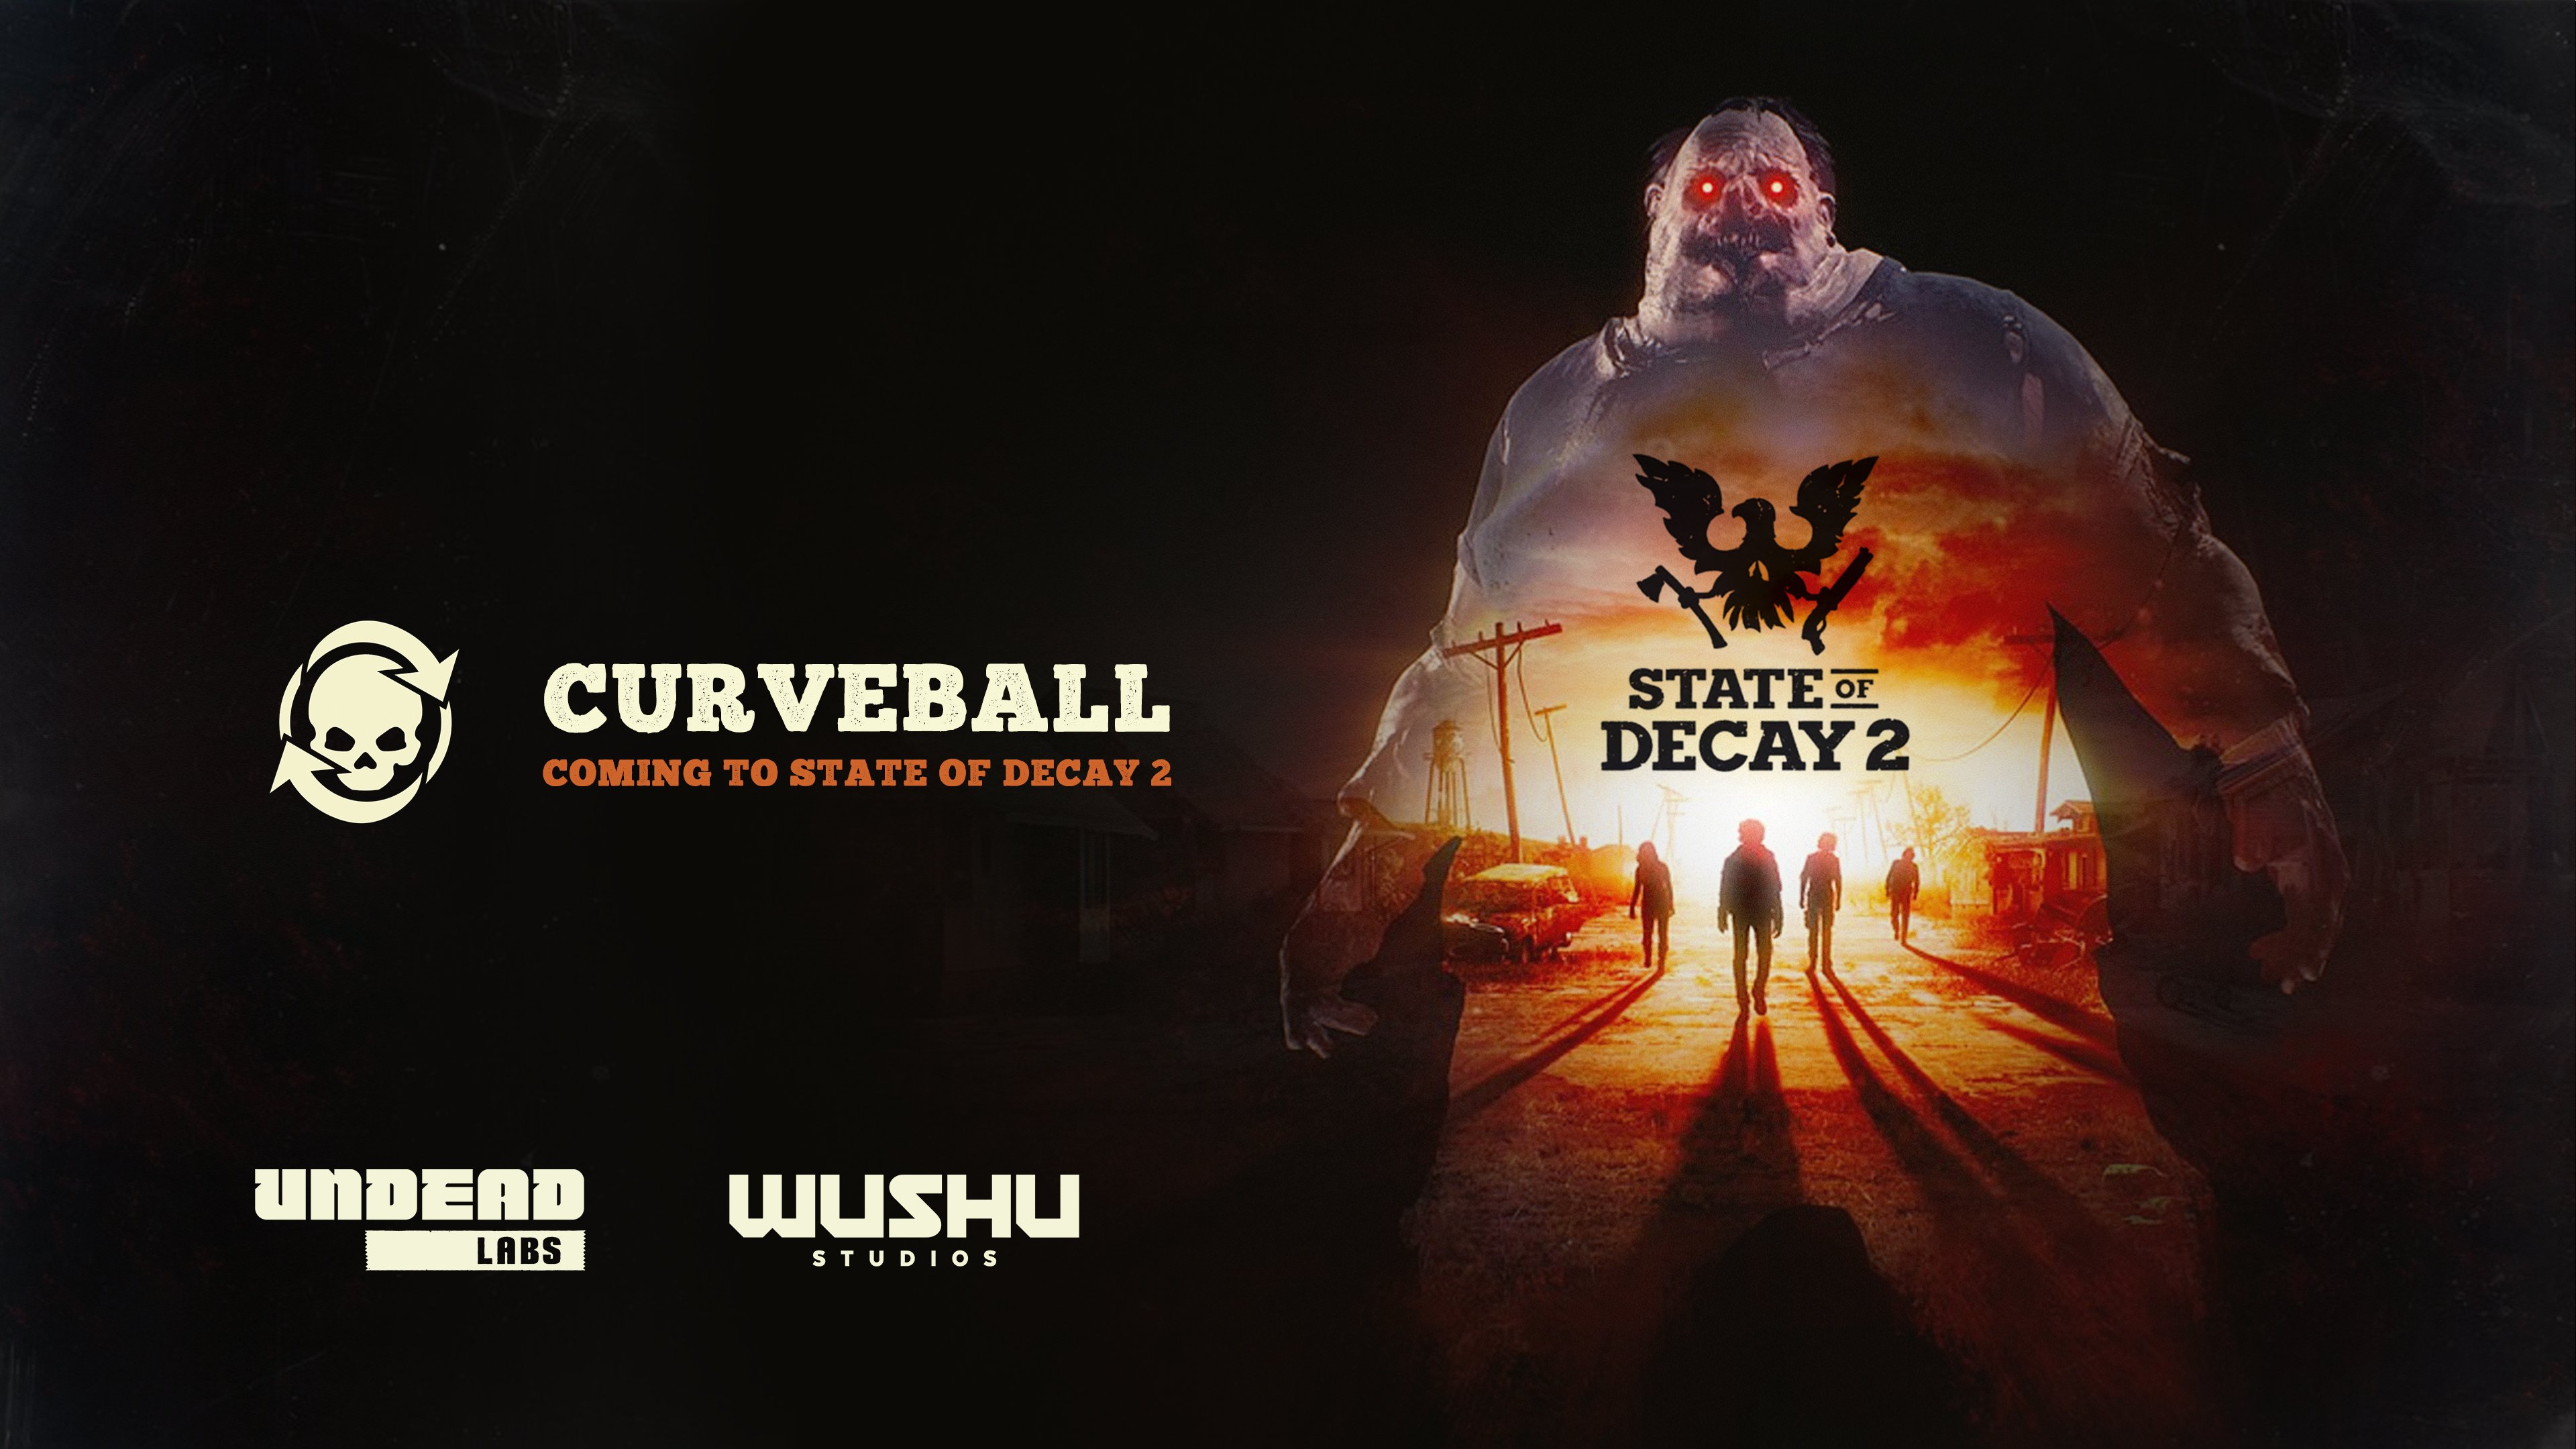 Klobrille on X: Coming this Fall to State of Decay 2: Curveball